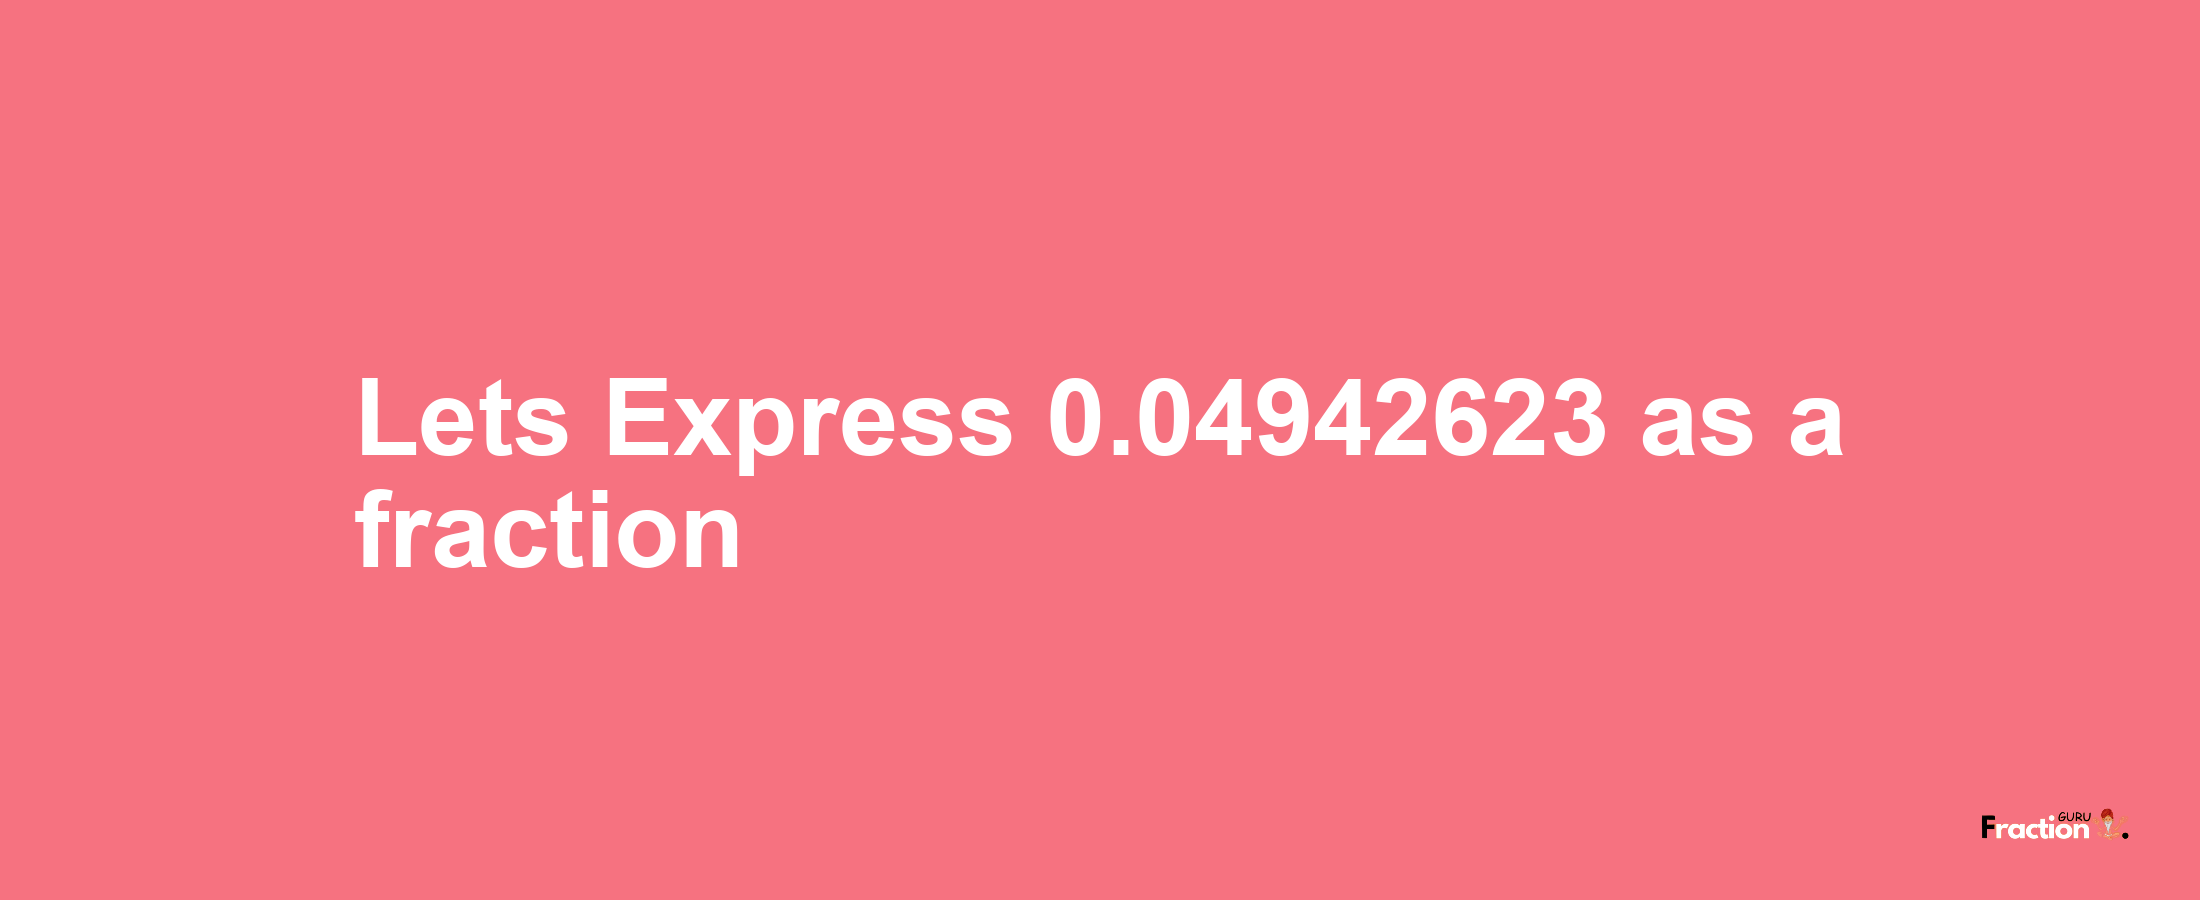 Lets Express 0.04942623 as afraction